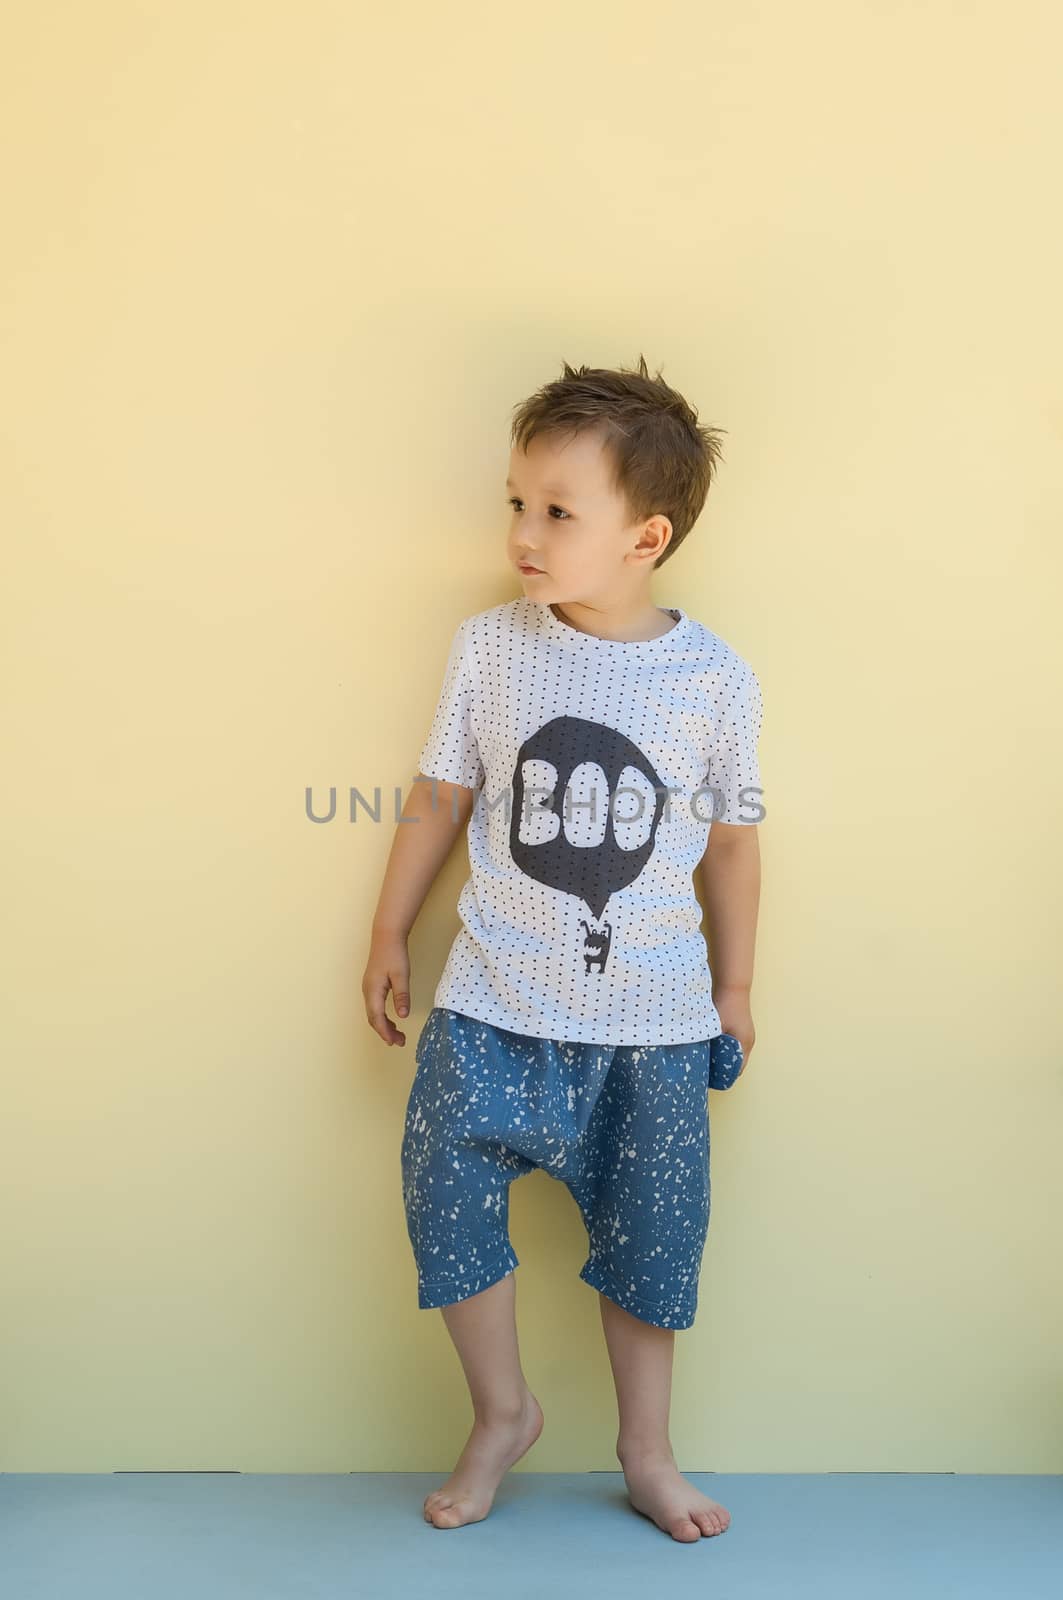 little boy in a shirt and shorts on a light yellow background